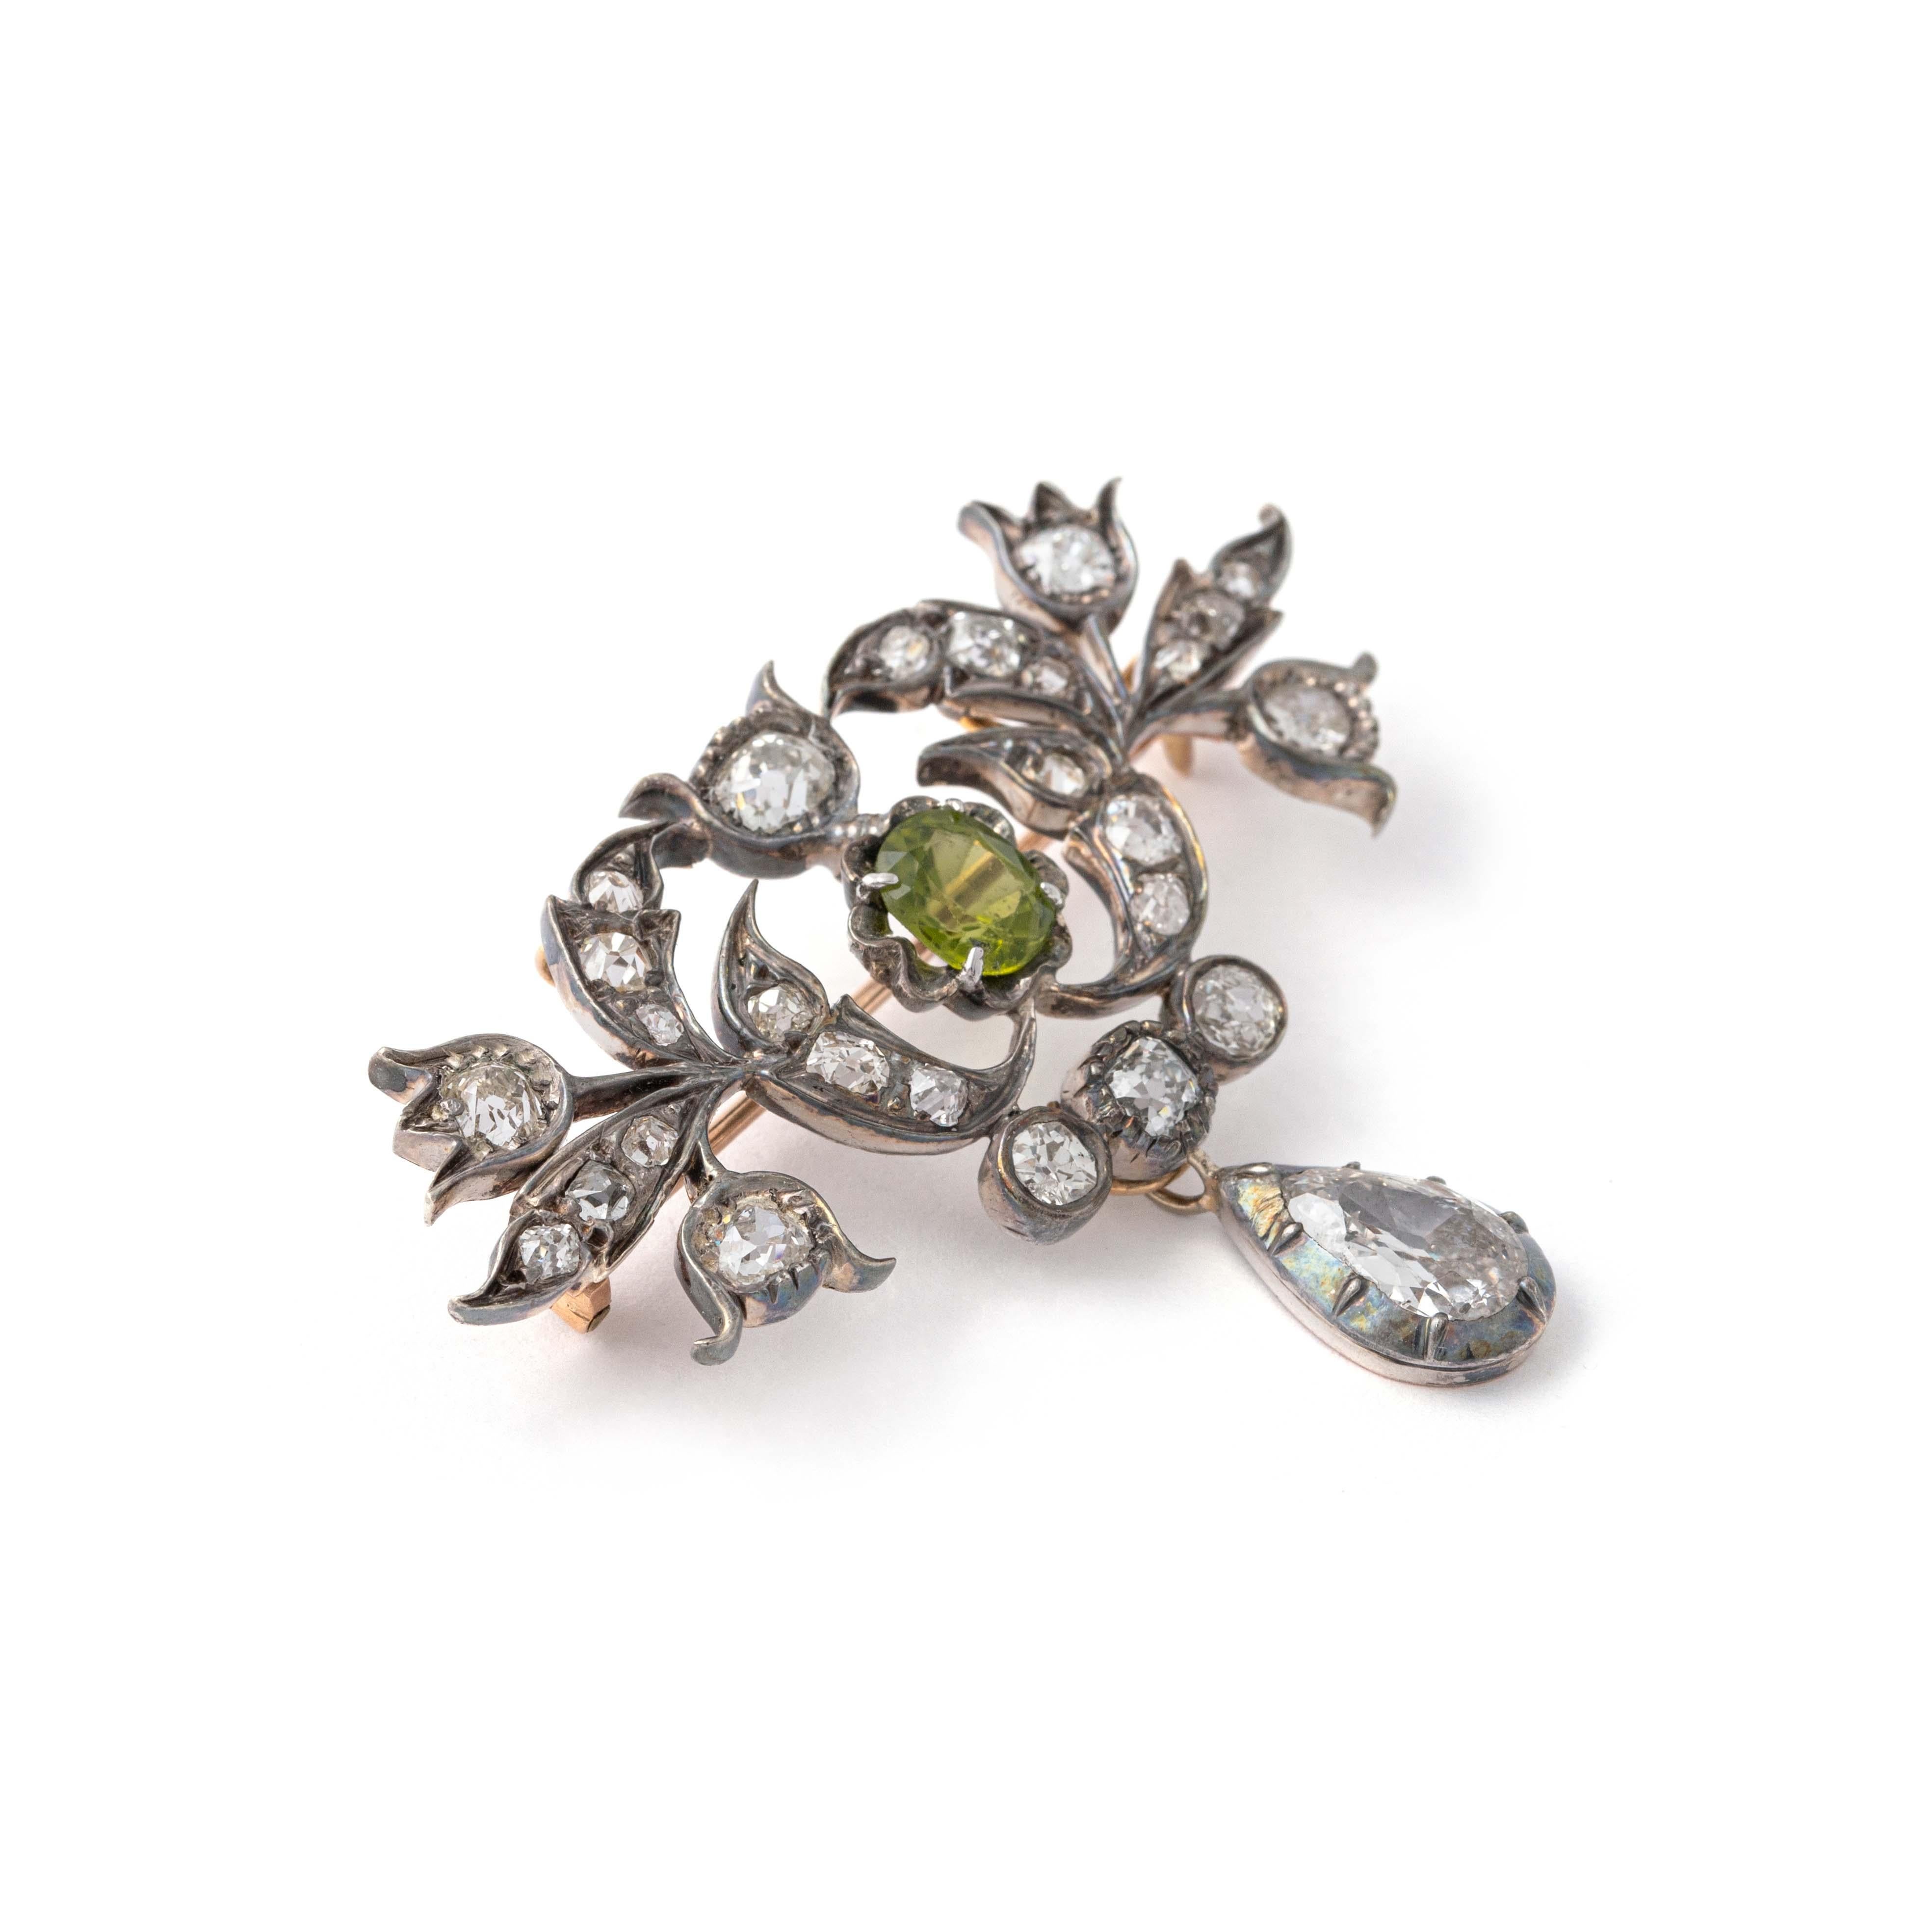 Antique Diamond and Peridot Brooch Pendant Late 19th Century For Sale 9